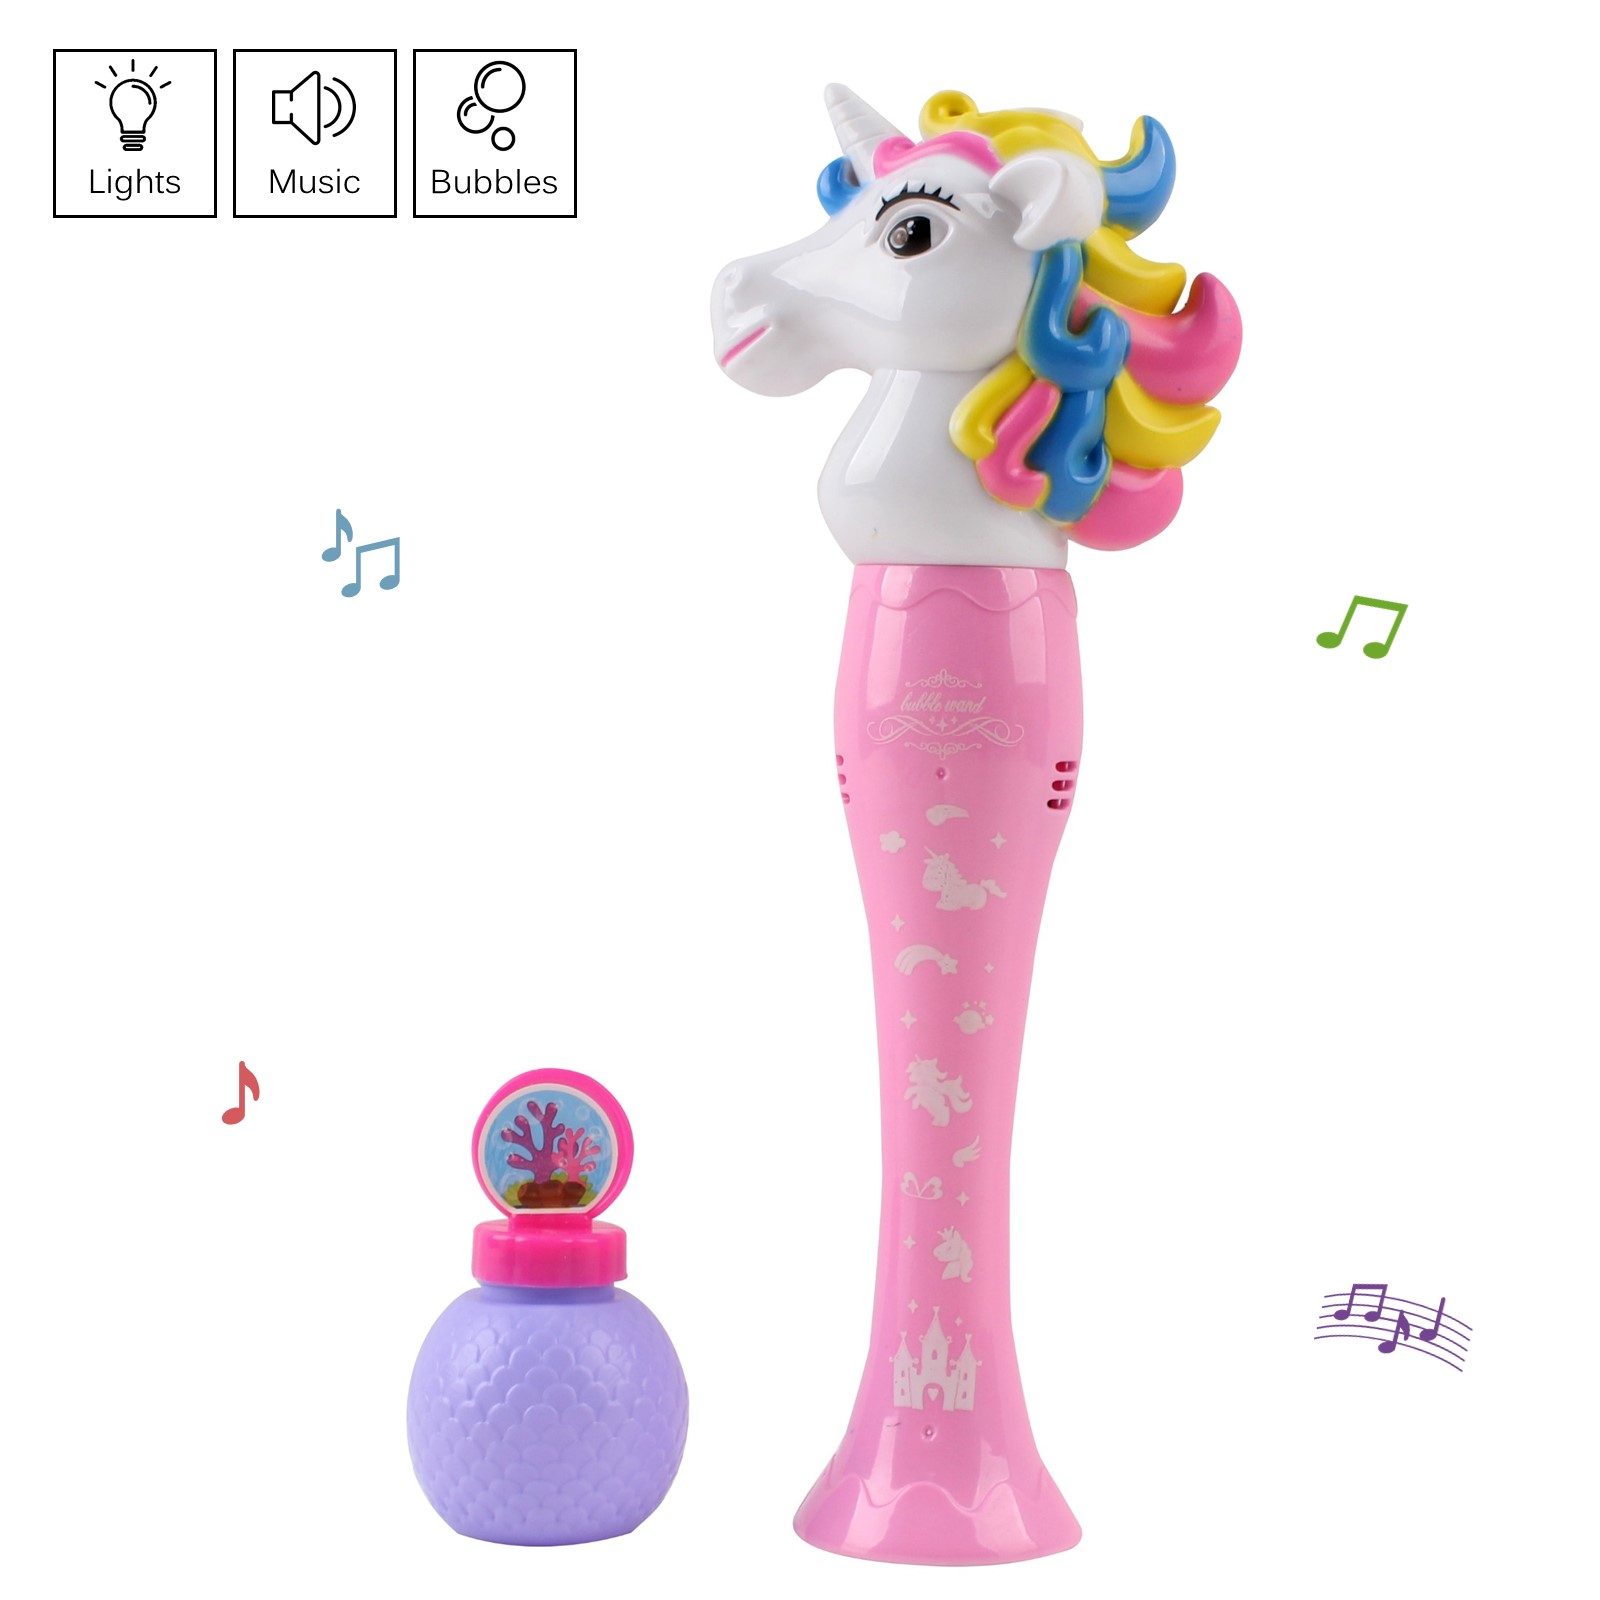 Unicorn Bubble Blower Machine Wand Automatically Shoots Over 500 Bubbles Per Minute With Light And Music Animal Design Includes 2 Fluid Solutions Simple And Easy to Use Gun Toy For Boys Girls Toddlers Battery Operated